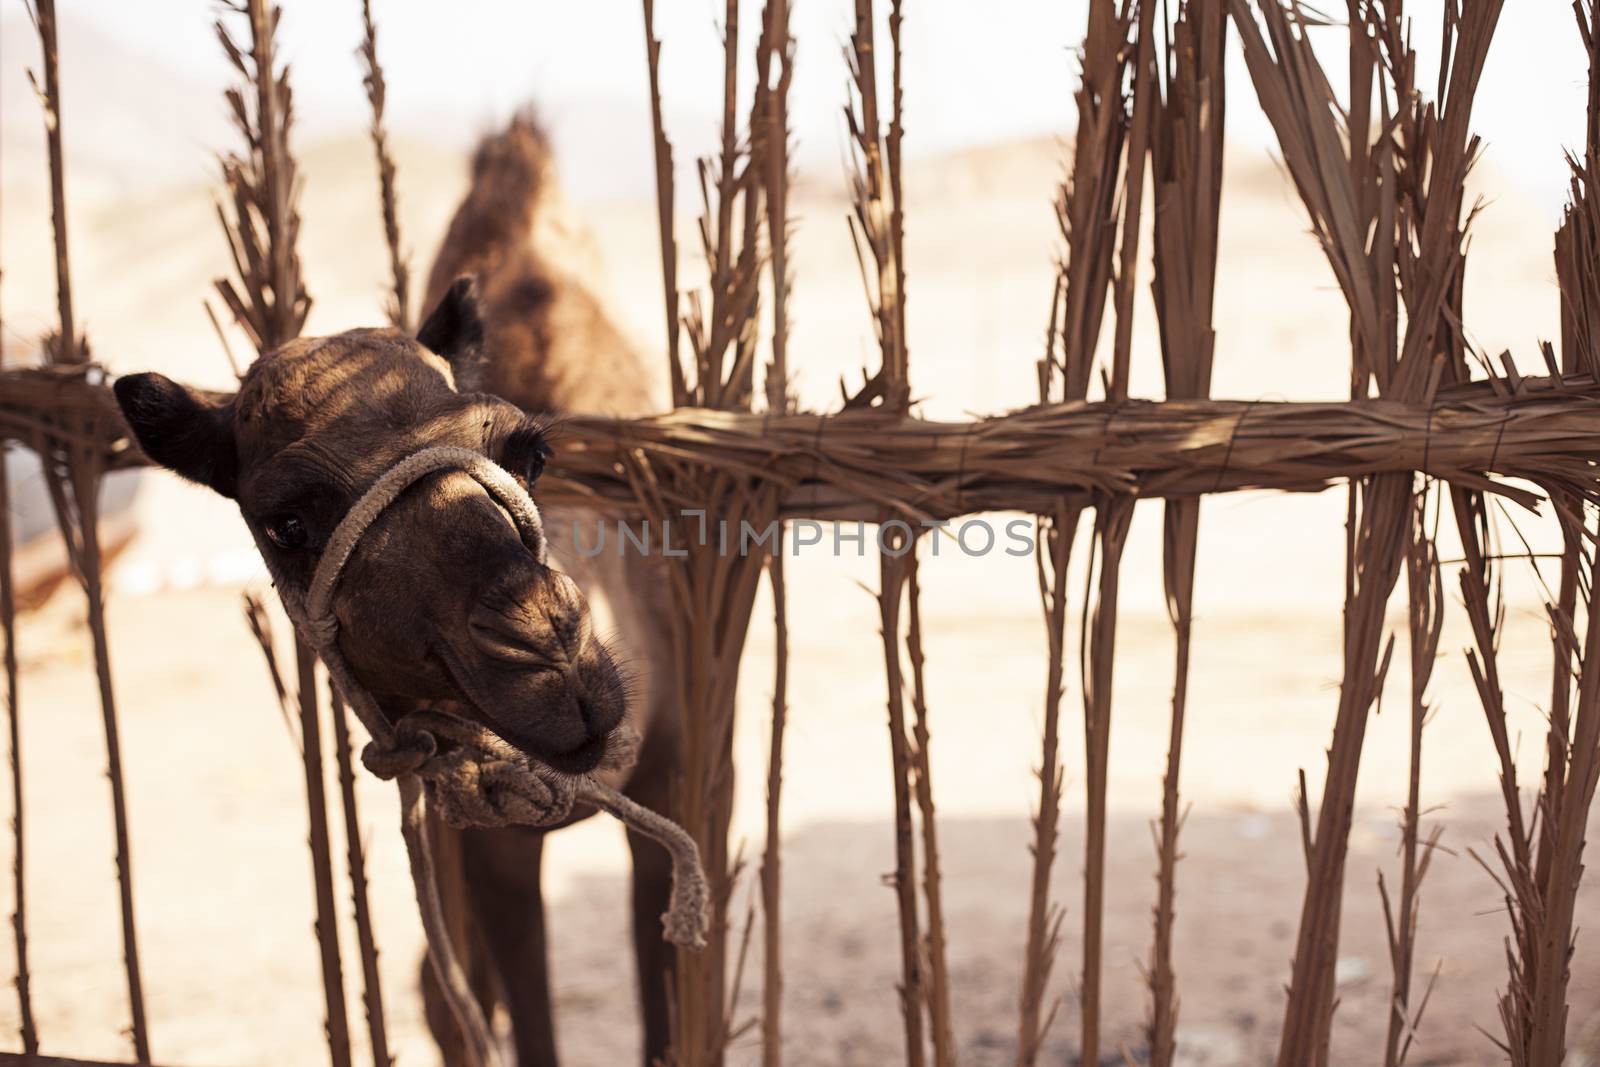 Young camel looks from behind a fence in Sharm El Sheikh Egypt